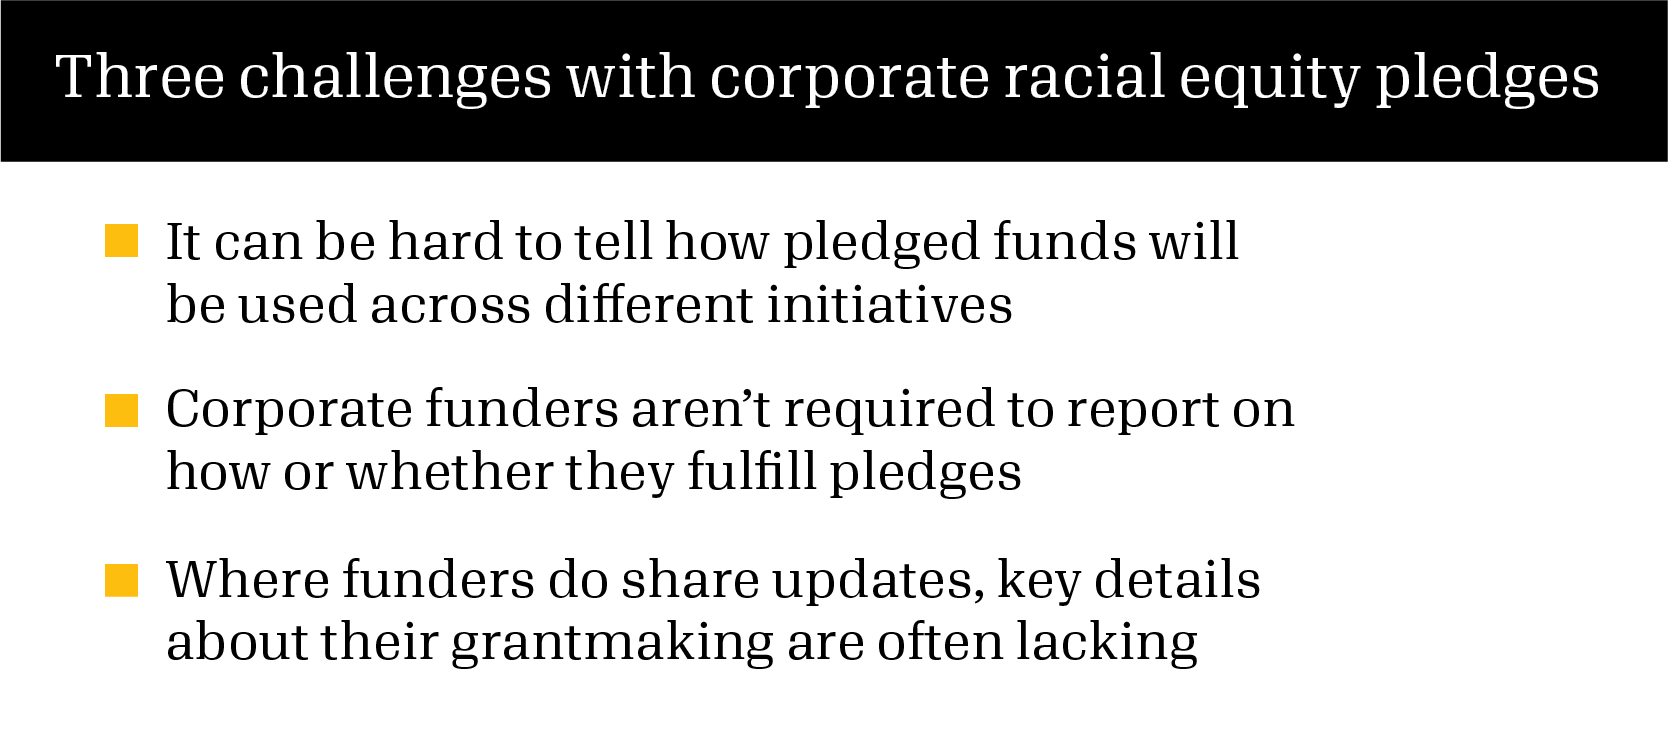 Explanation of three challenges with corporate racial equity pledges